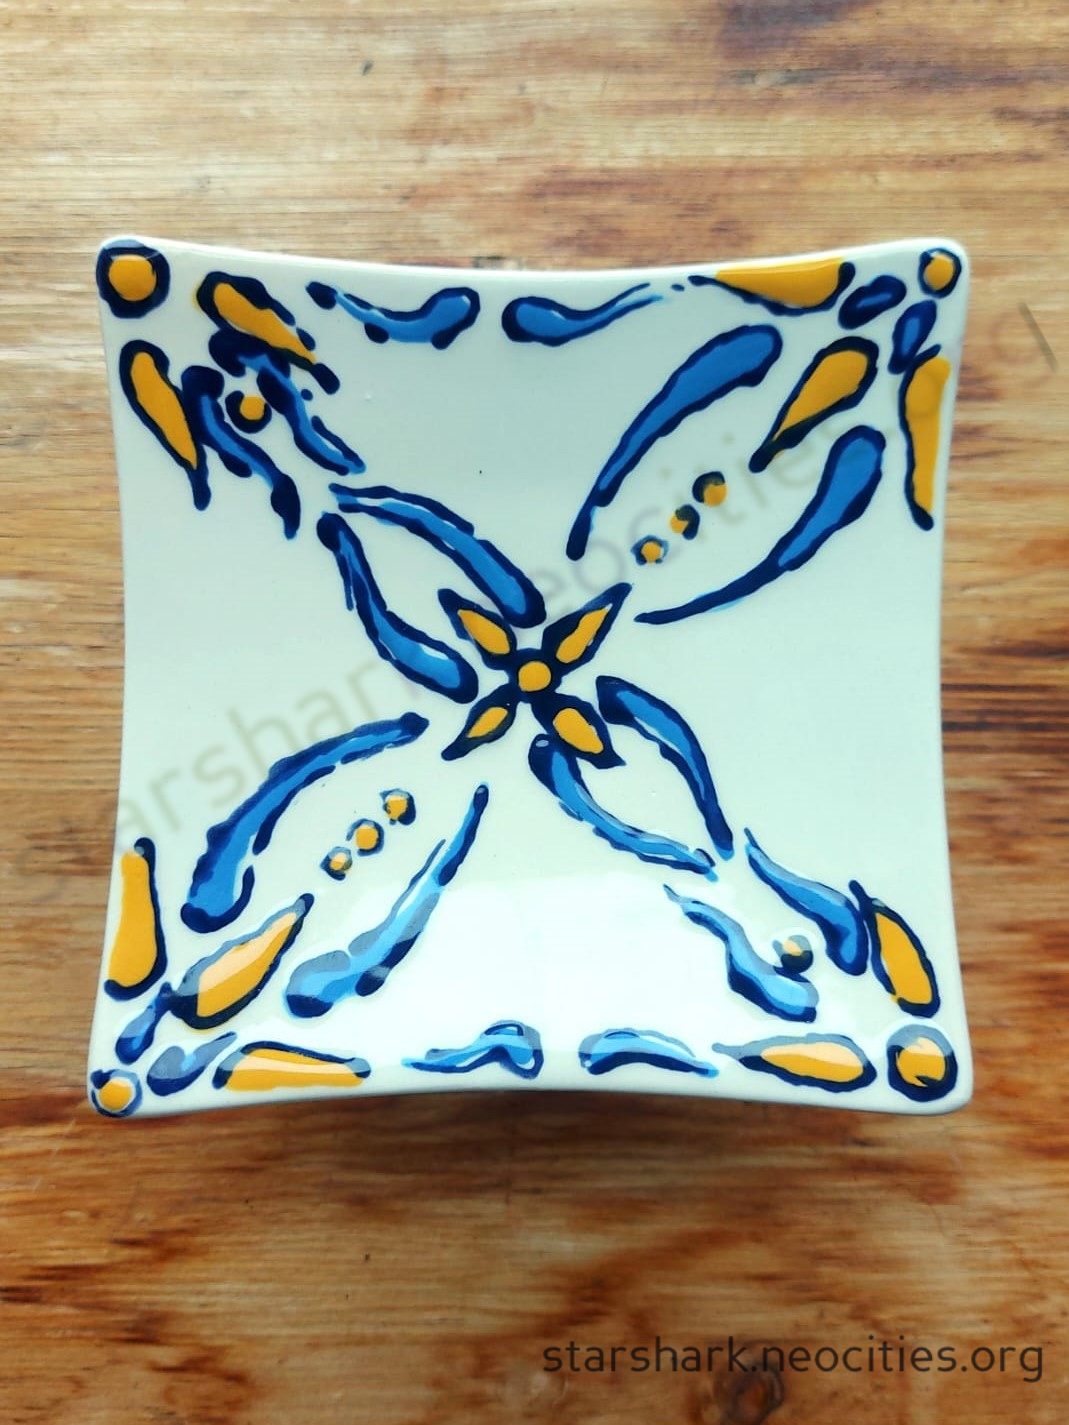 a ceramic trinket dish with blue and yellow portugese tile-style designs